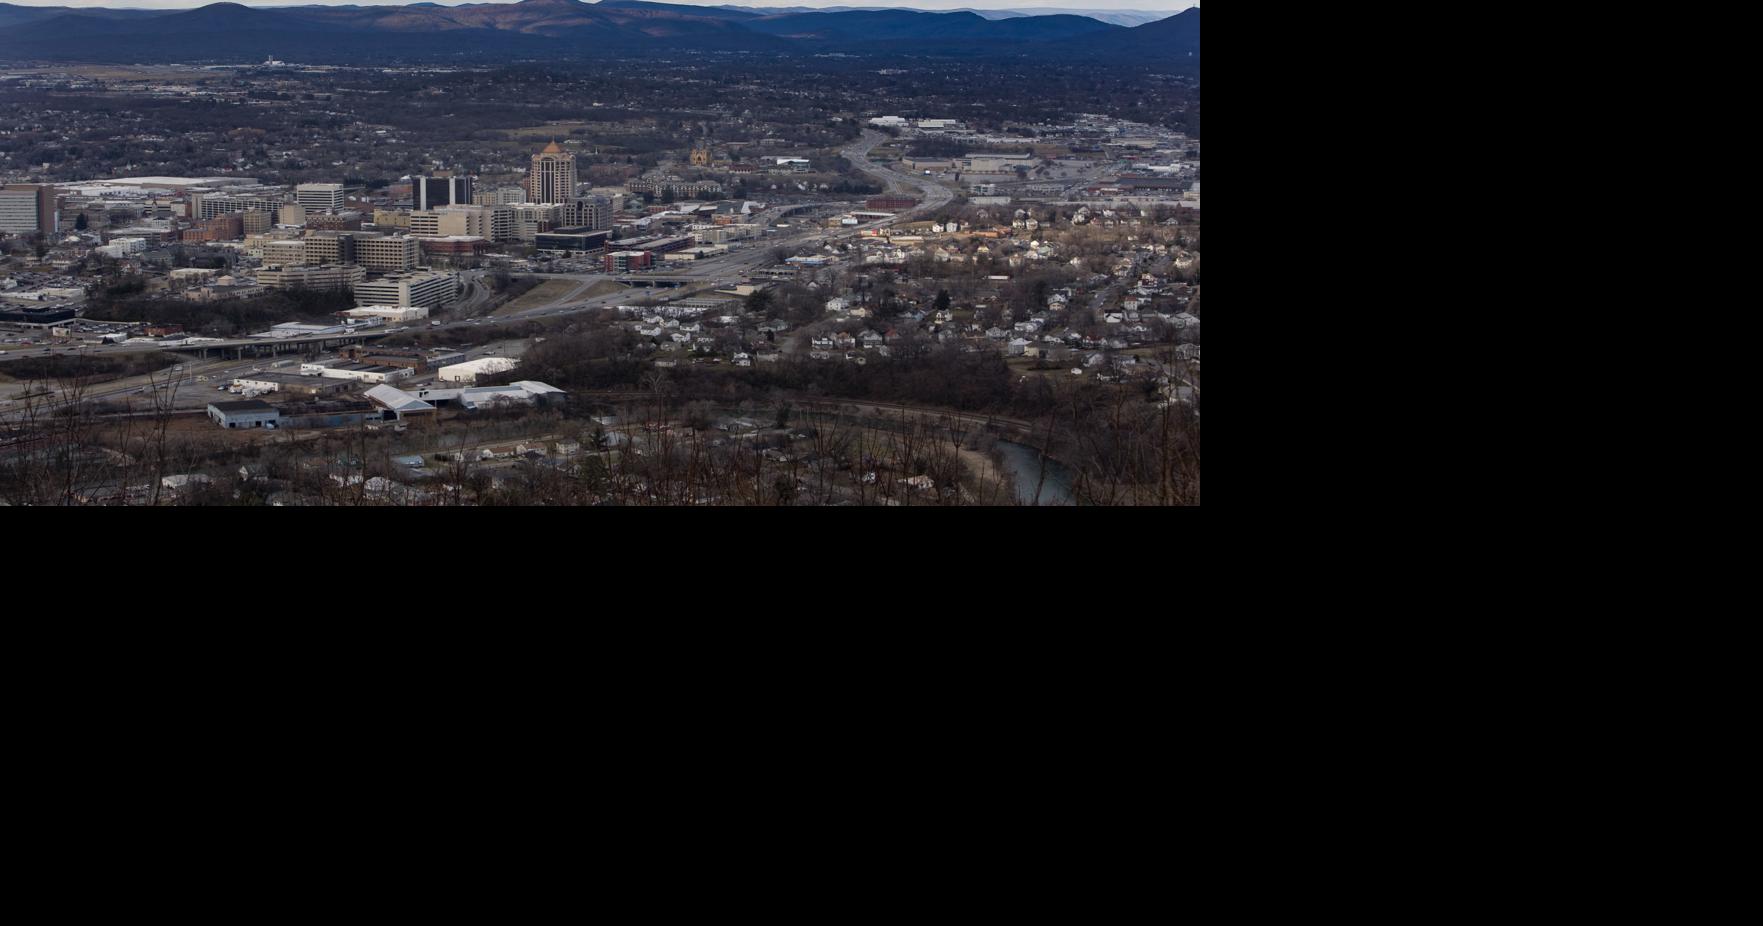 Roanoke's population nudges back above 100,000 for first time since